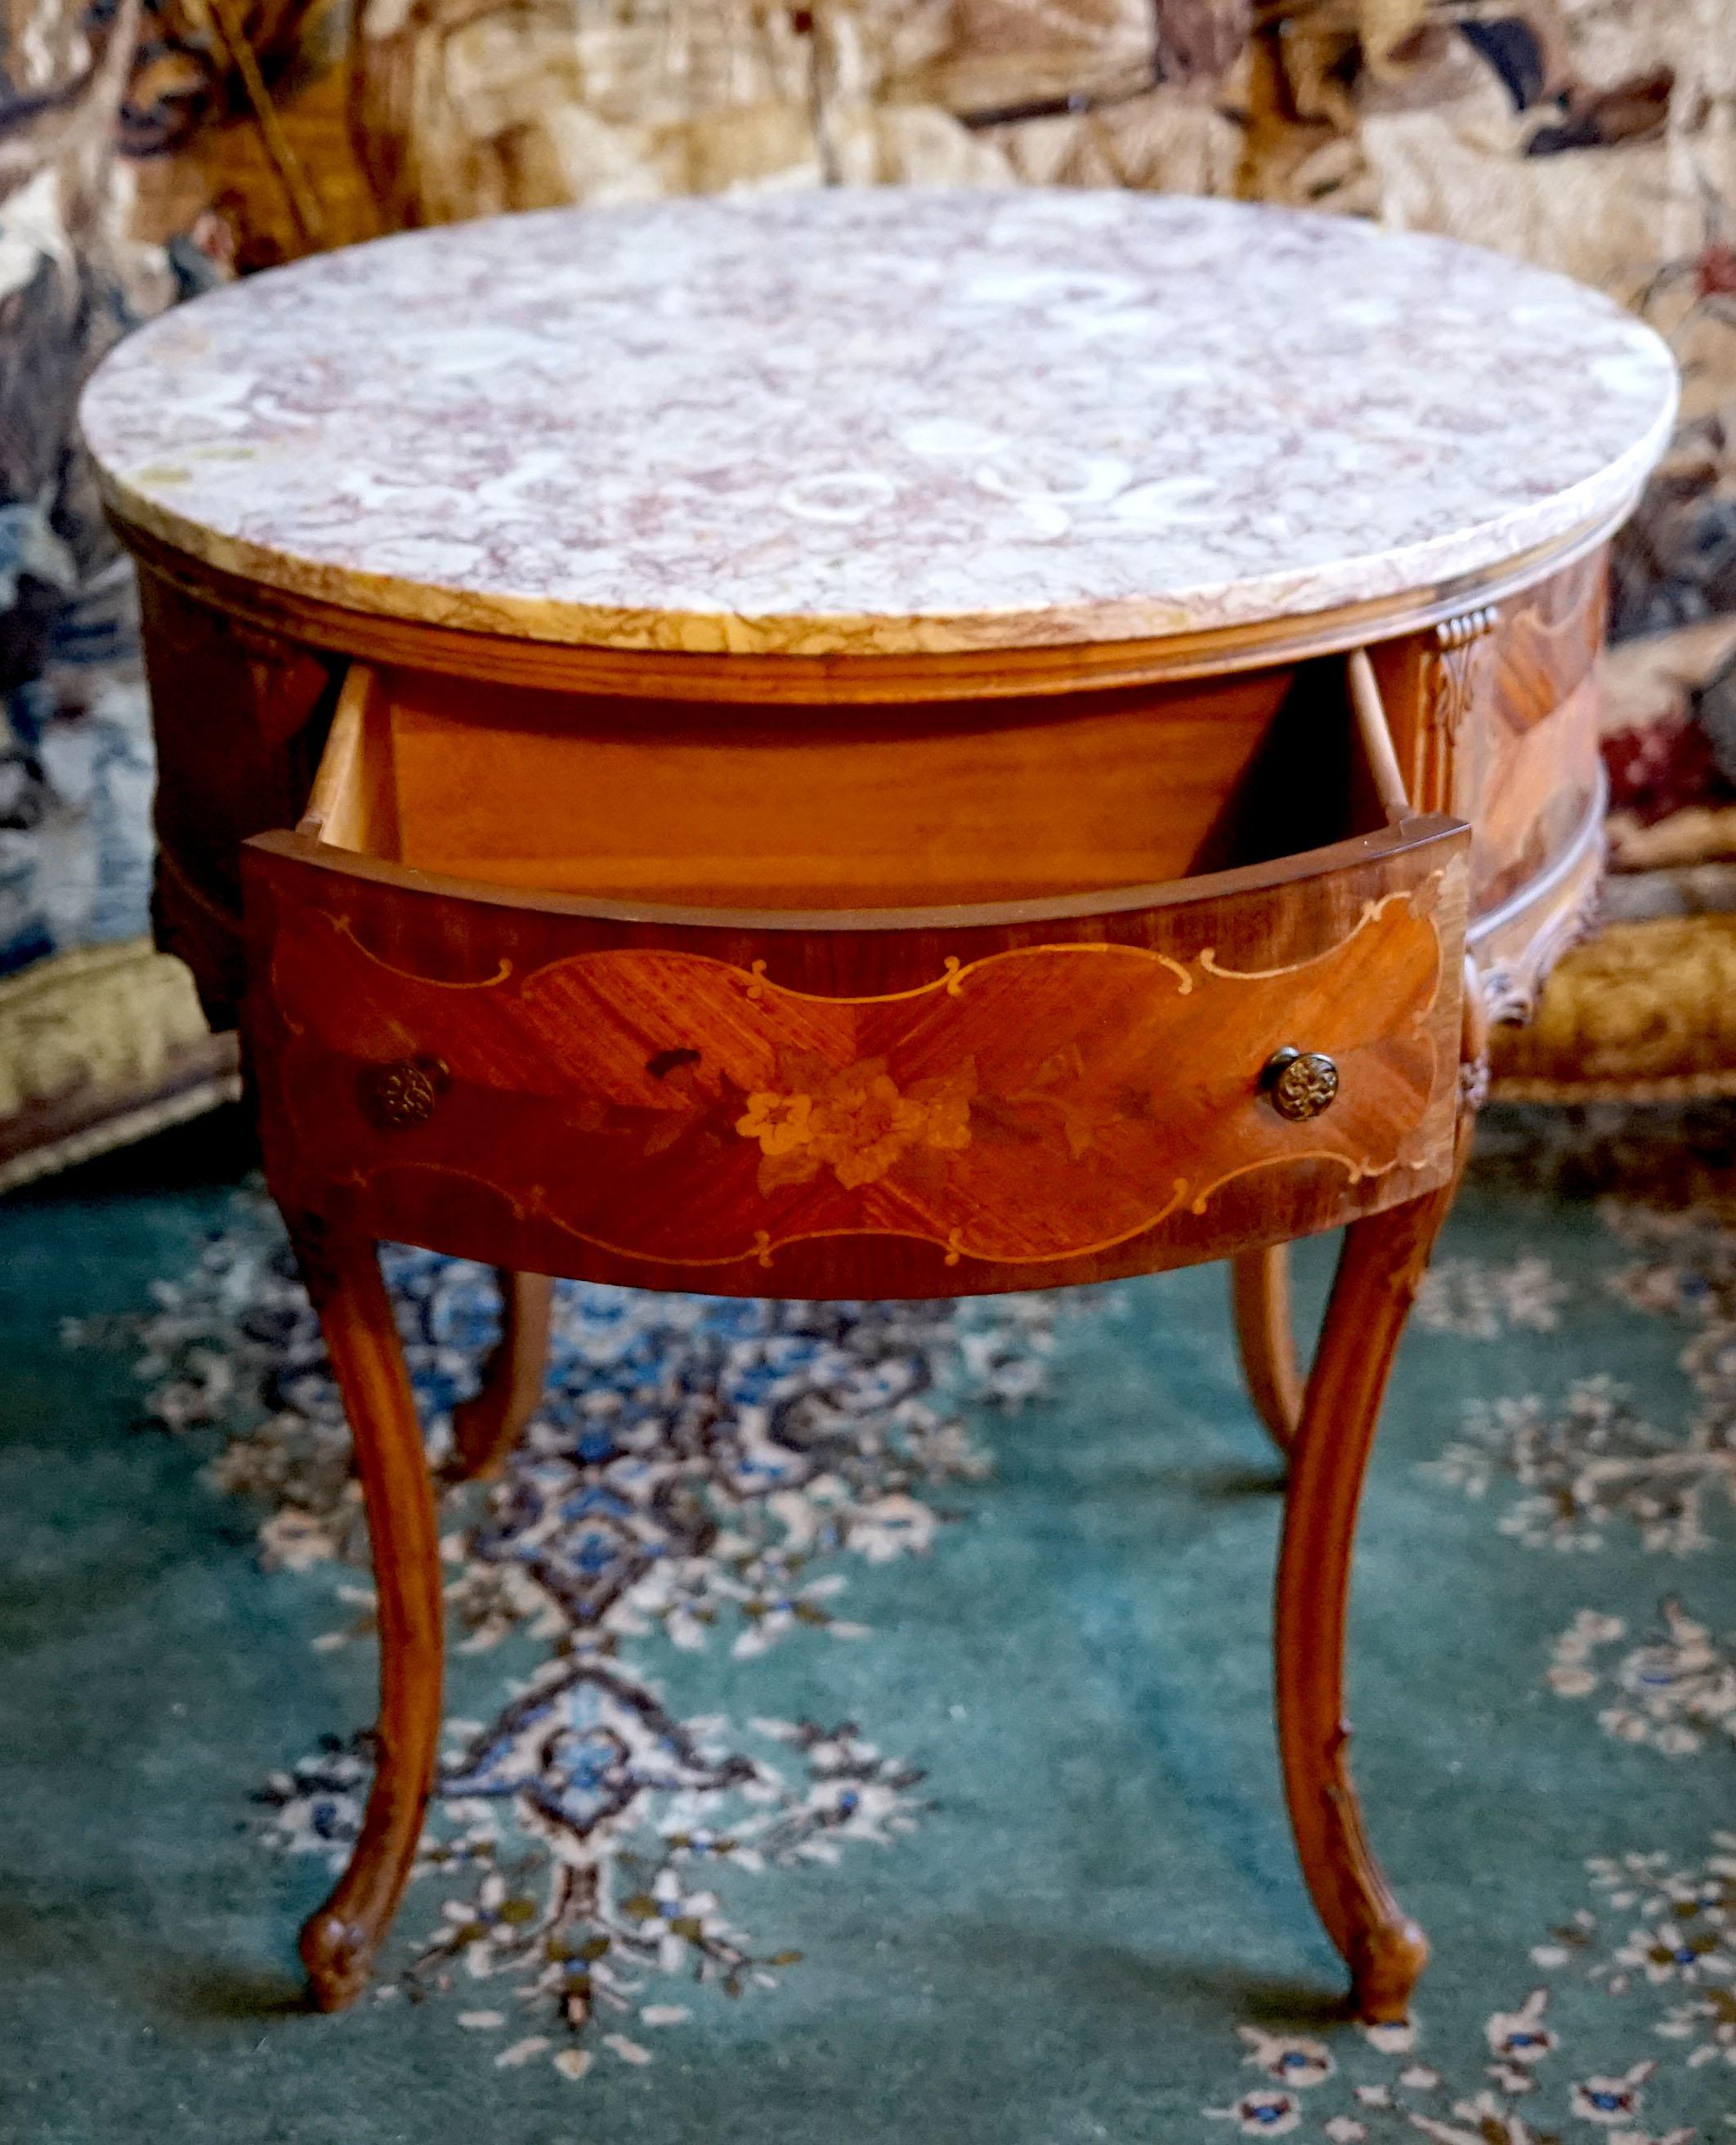 Antique Louis XV style round center table produced between 1875 and 1900 is stunning. It is parcel gilt parquetry, marquetry and inlaid satinwood, which is surmounted by a circular Brêche Violette marble top. The table includes two deep drawers, but